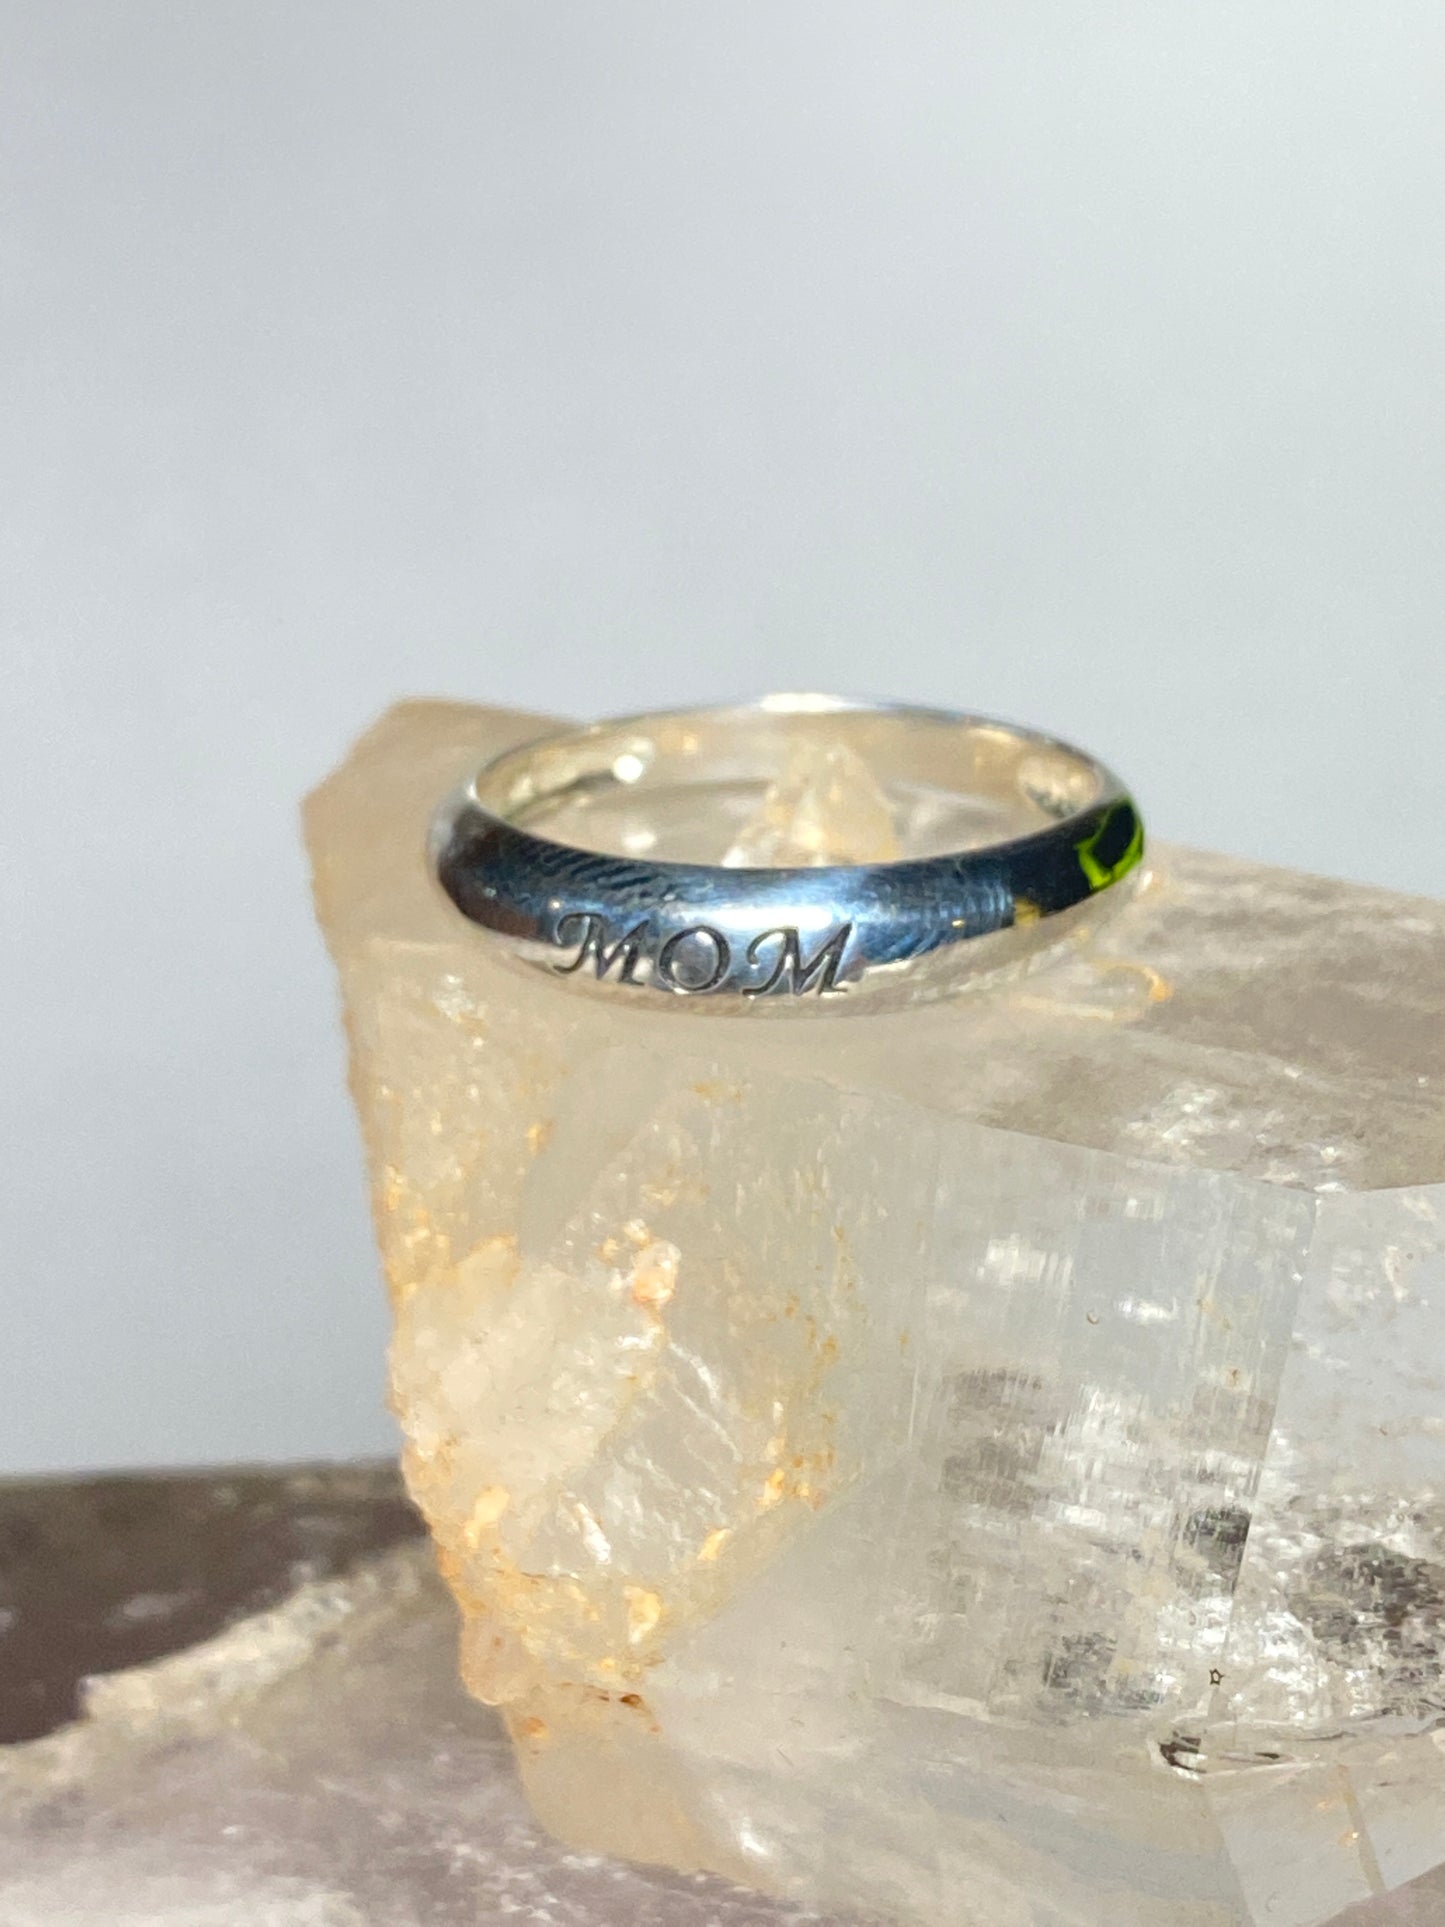 Mom Ring word band love friendship sterling silver women daughters girls